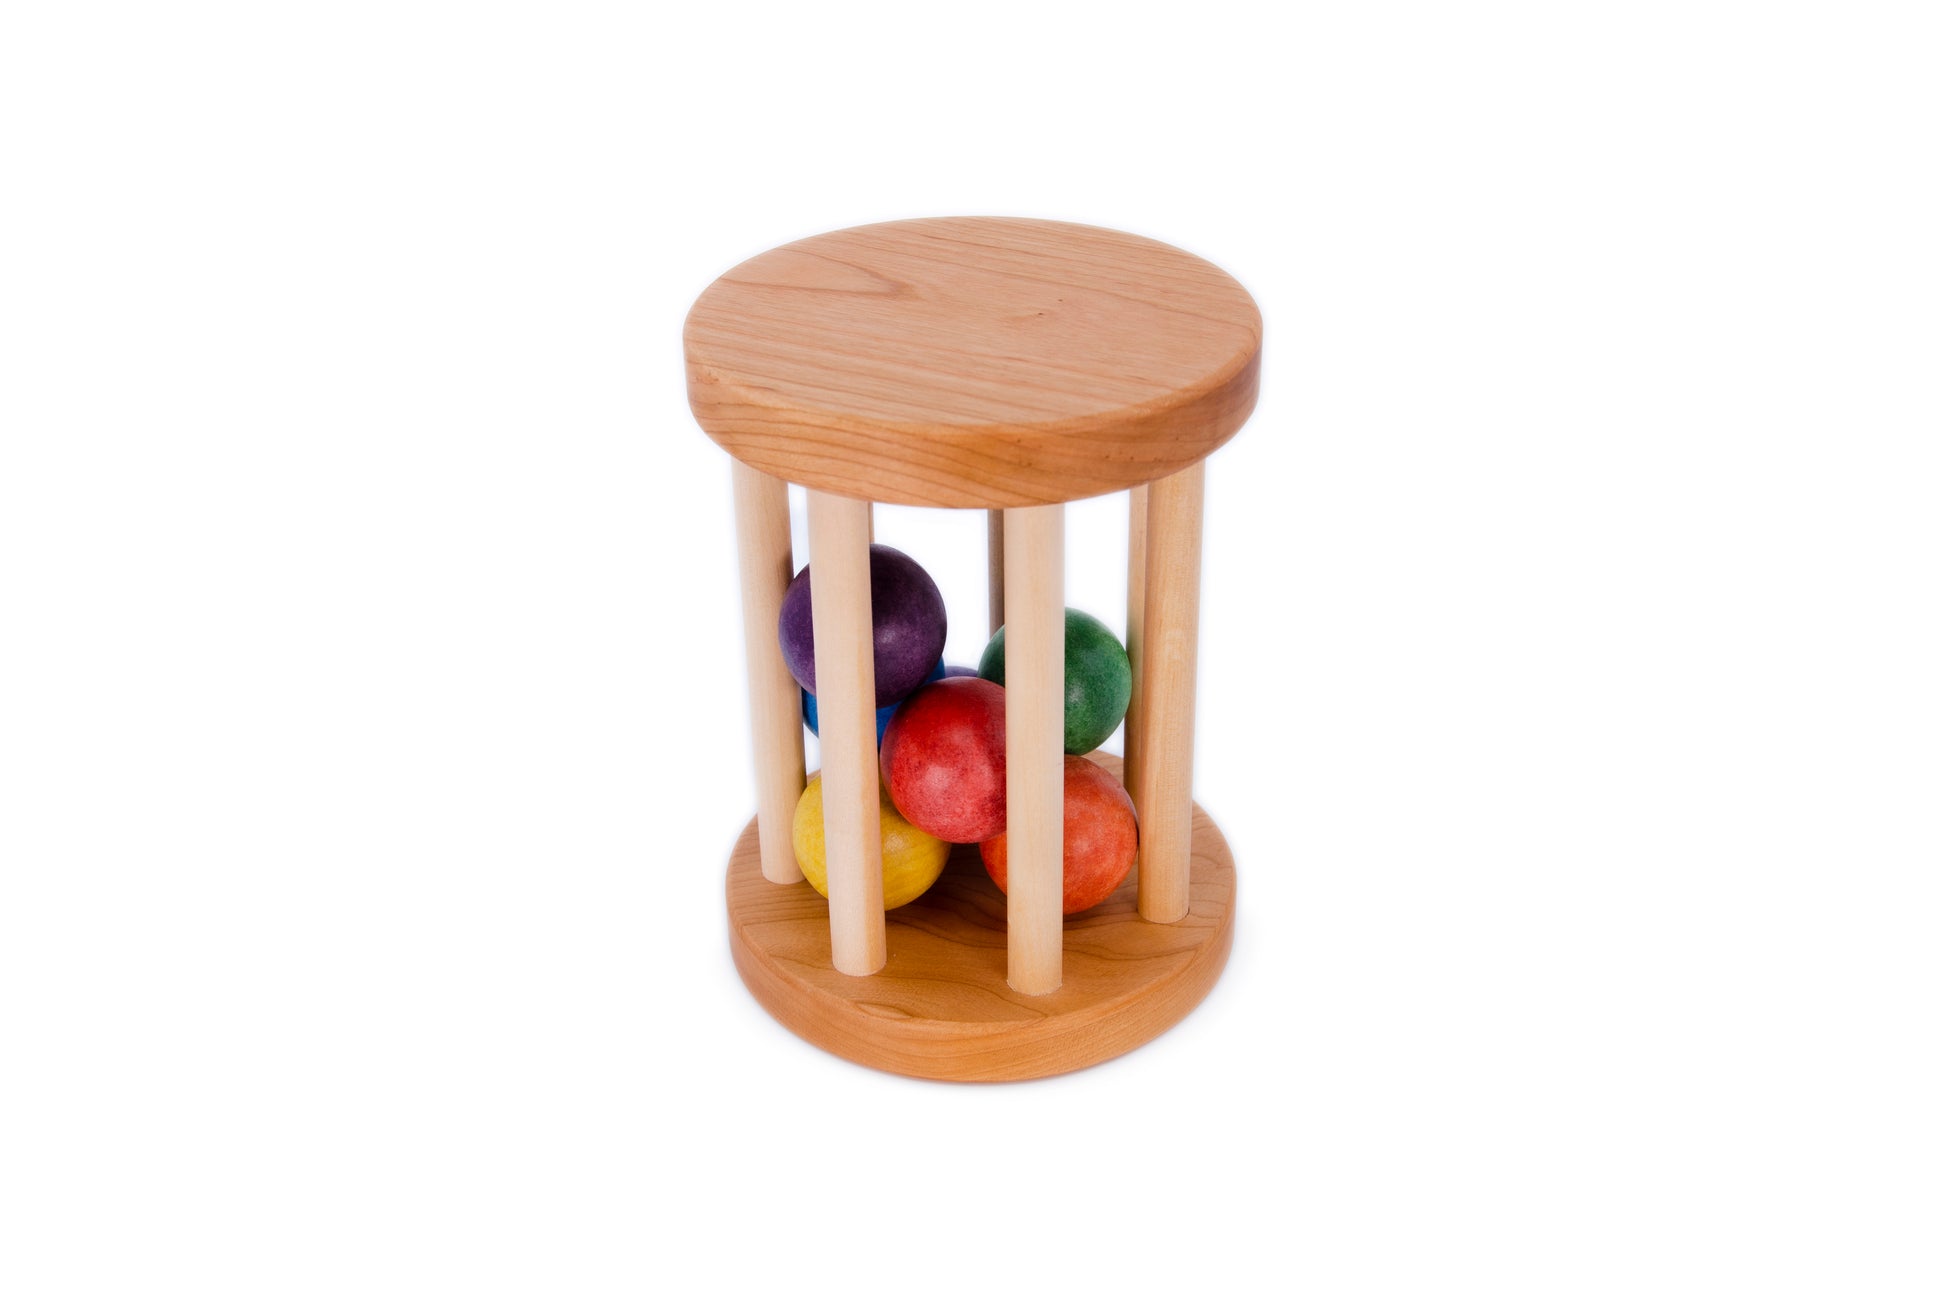 Color balls cylinder with 7 rainbow colors - Red, Orange, Yellow, Green, Blue, Indigo, Purple The round base plates are made with Maple, the dowels are birch hardwood. The colors are Zuelch water base stain from Germany, clear coat is also by Zuelch.